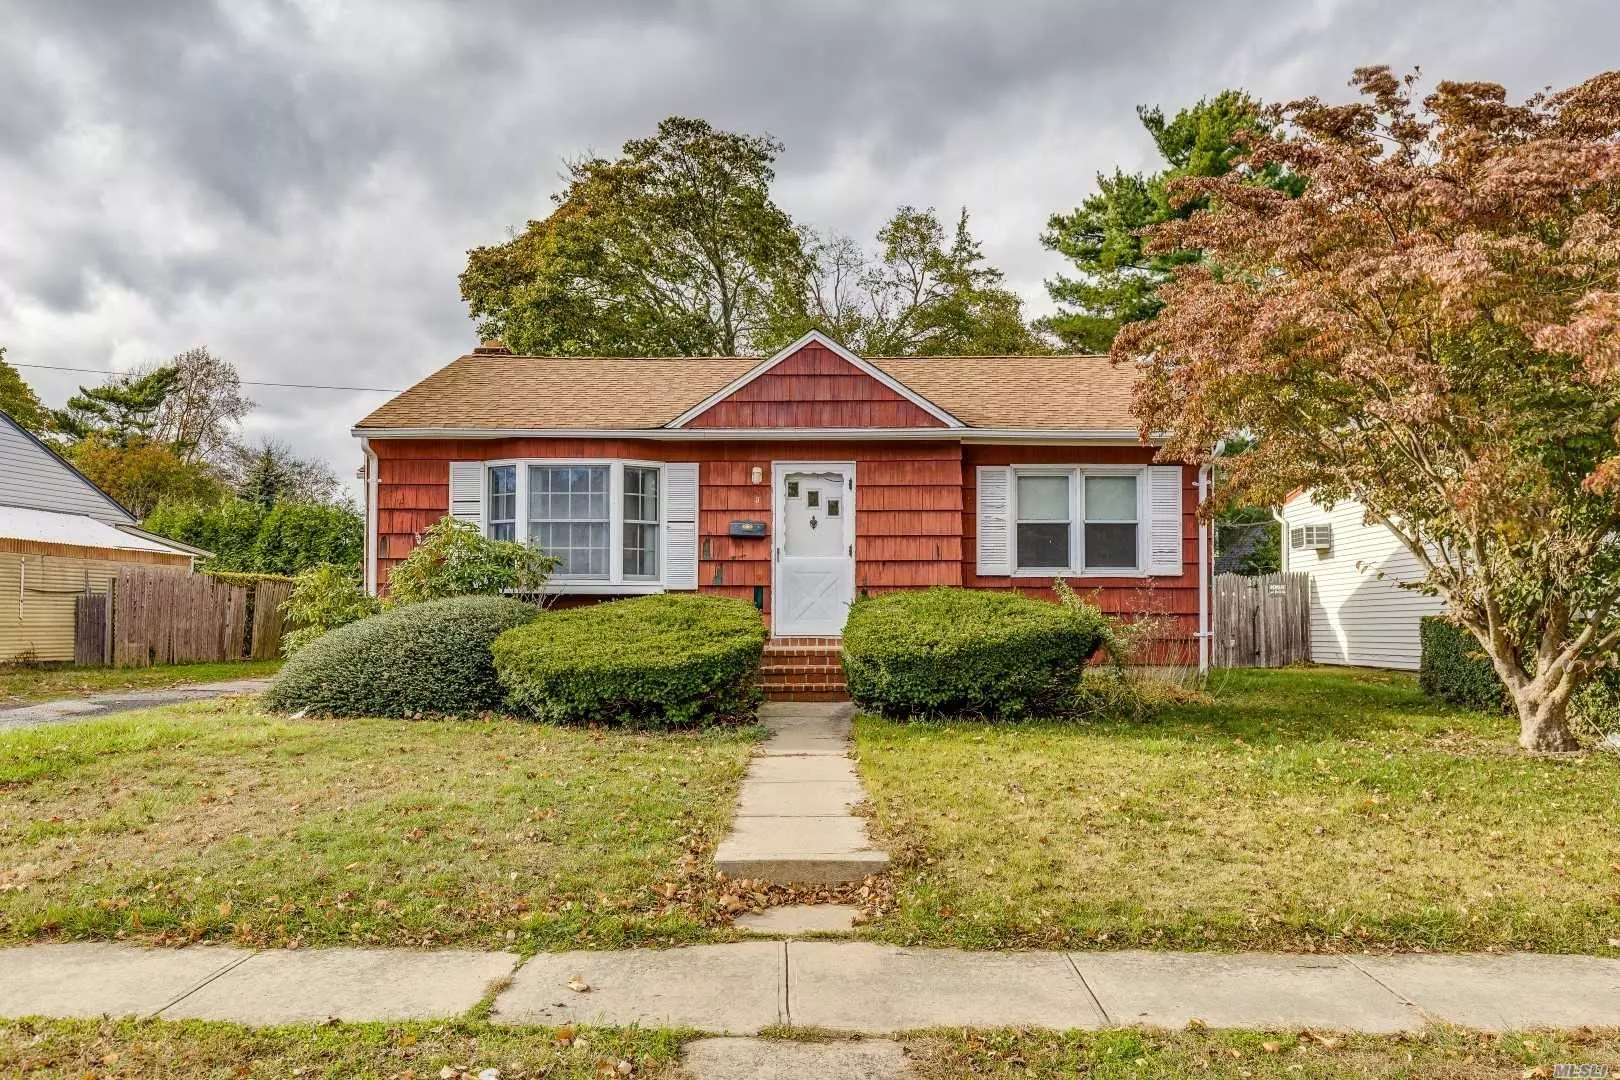 Sunny Bright 3 Expanded Bedroom Ranch In Plainedge Schools. Hardwood Floors, Eik, Dining Room, Large Living Room Extension, Part Finished Basement. Updated Roof, Electric - (200 Amps), Deck For Entertaining/Quiet Yard. As Is. Taxes Grieved